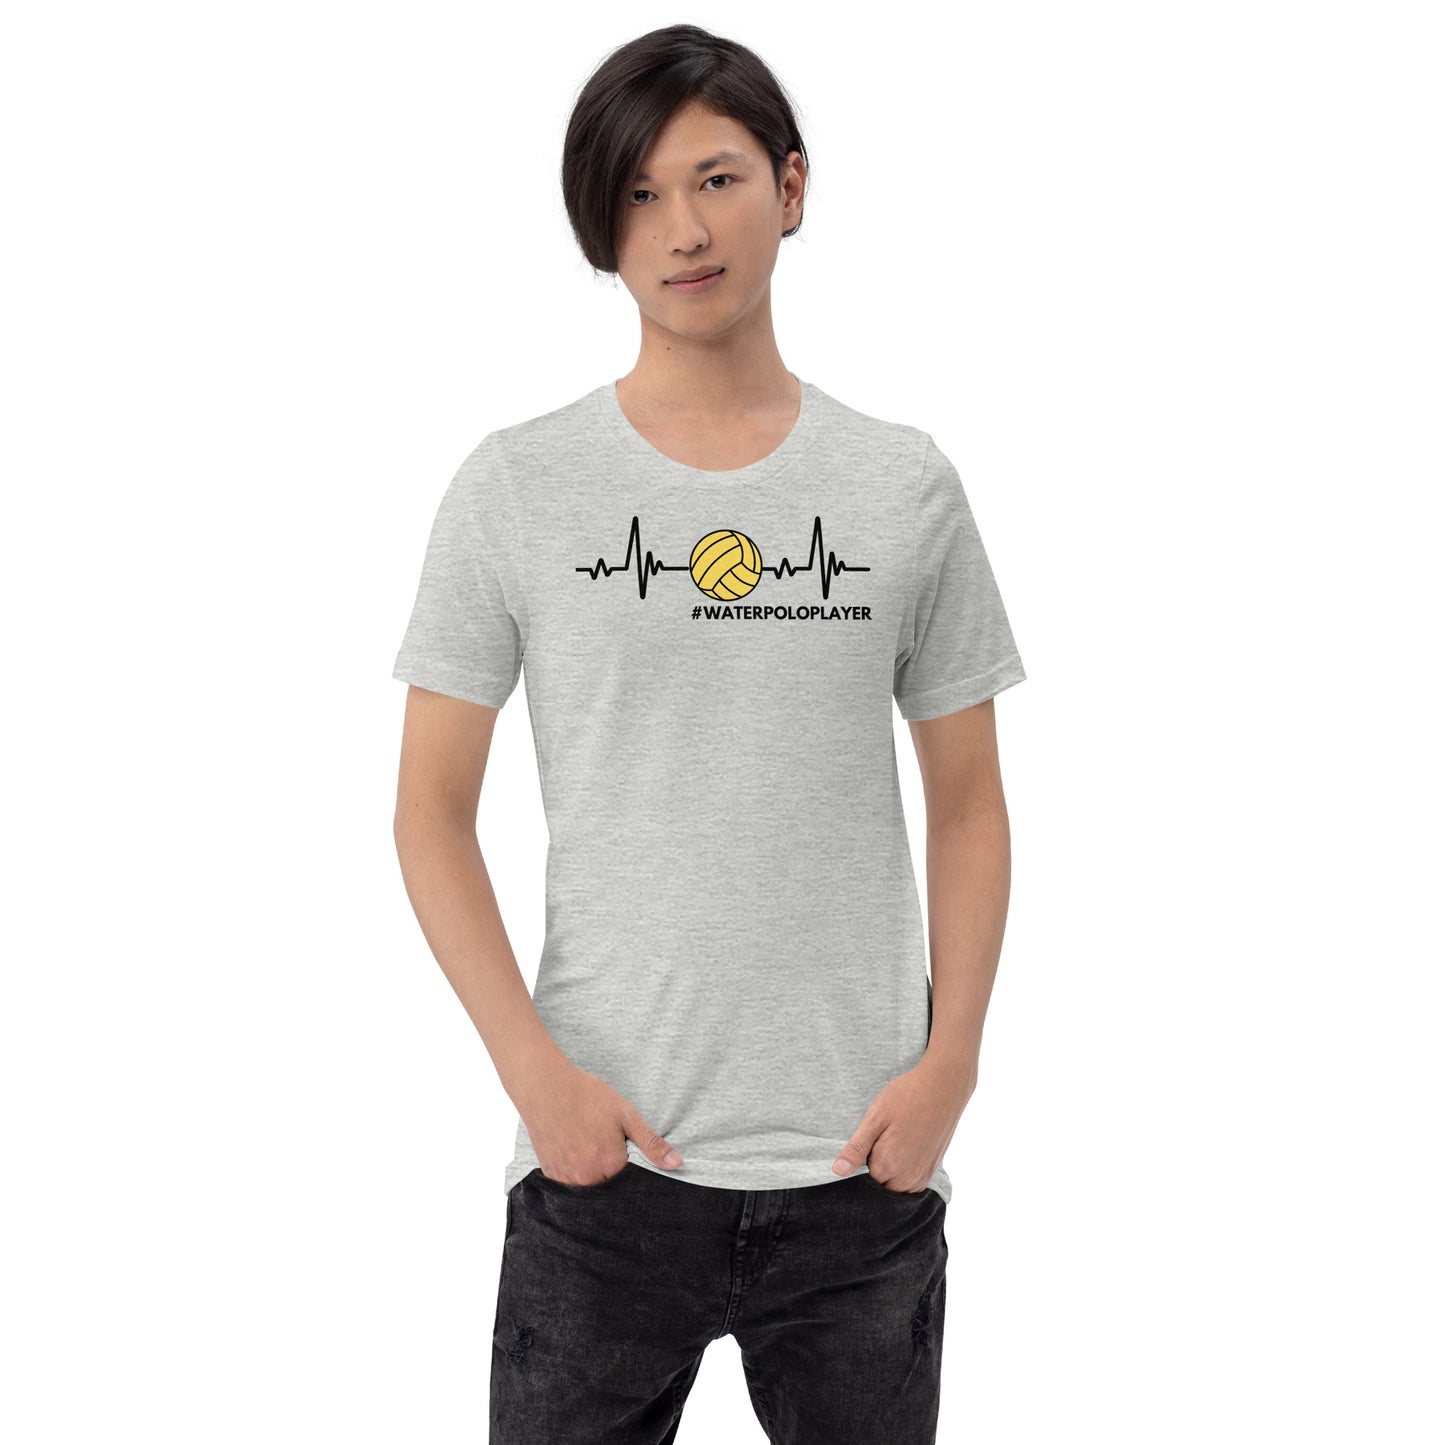 Waterpolo Player Heartbeat - Unisex Soft T-shirt - Bella Canvas 3001